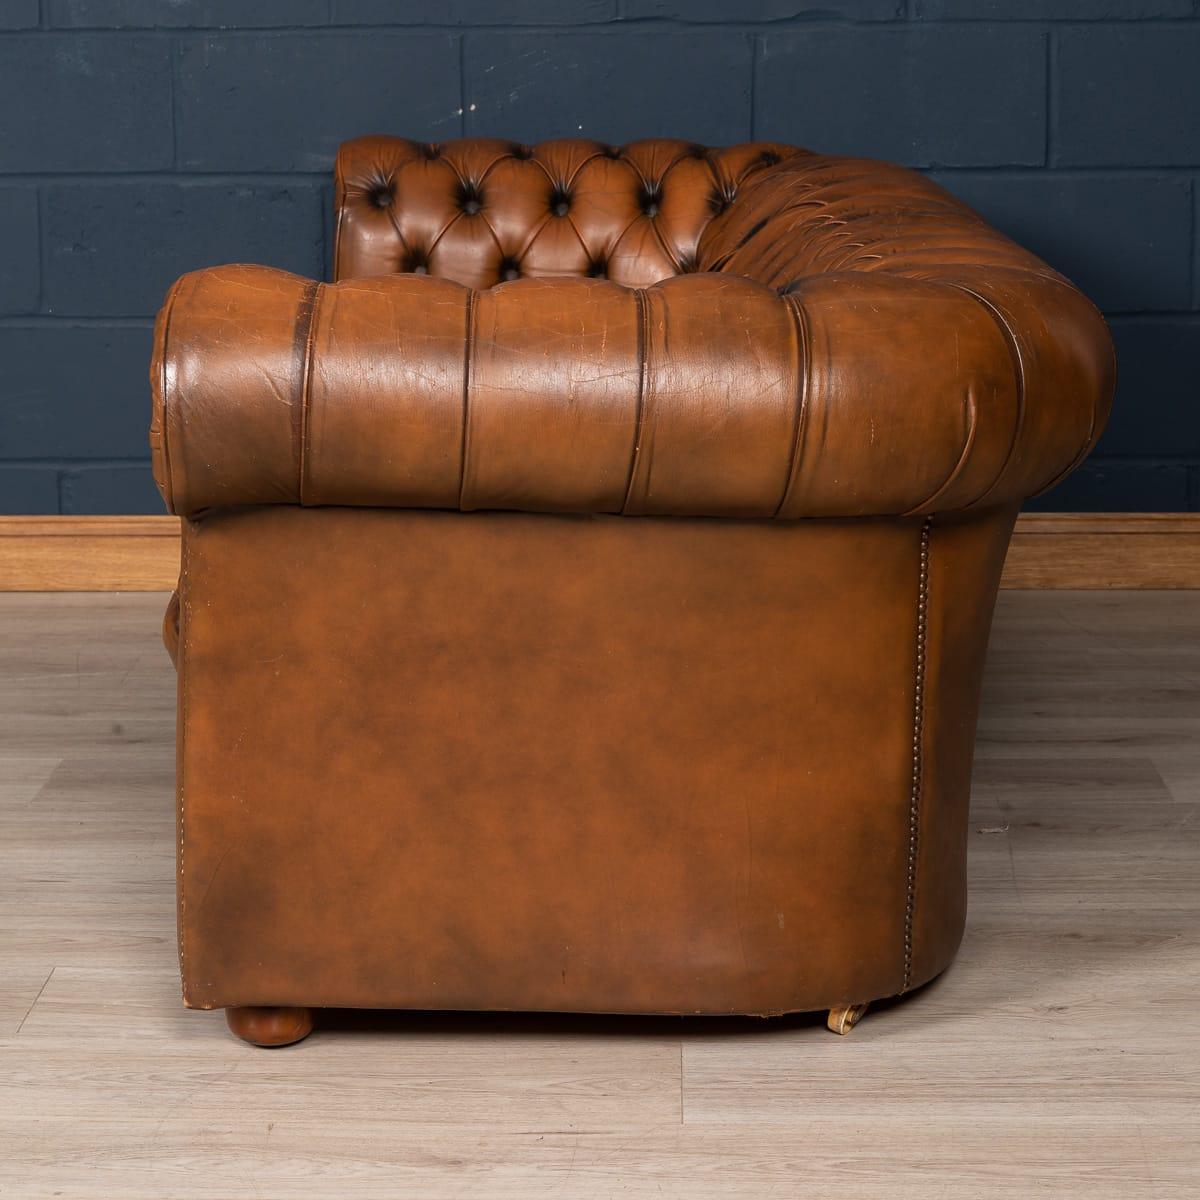 Lovely late 20th century leather chesterfield sofa. One of the most elegant models with button down seating, this is a fashionable item of furniture capable of uplifting the interior space of any contemporary or traditional home, the classic color